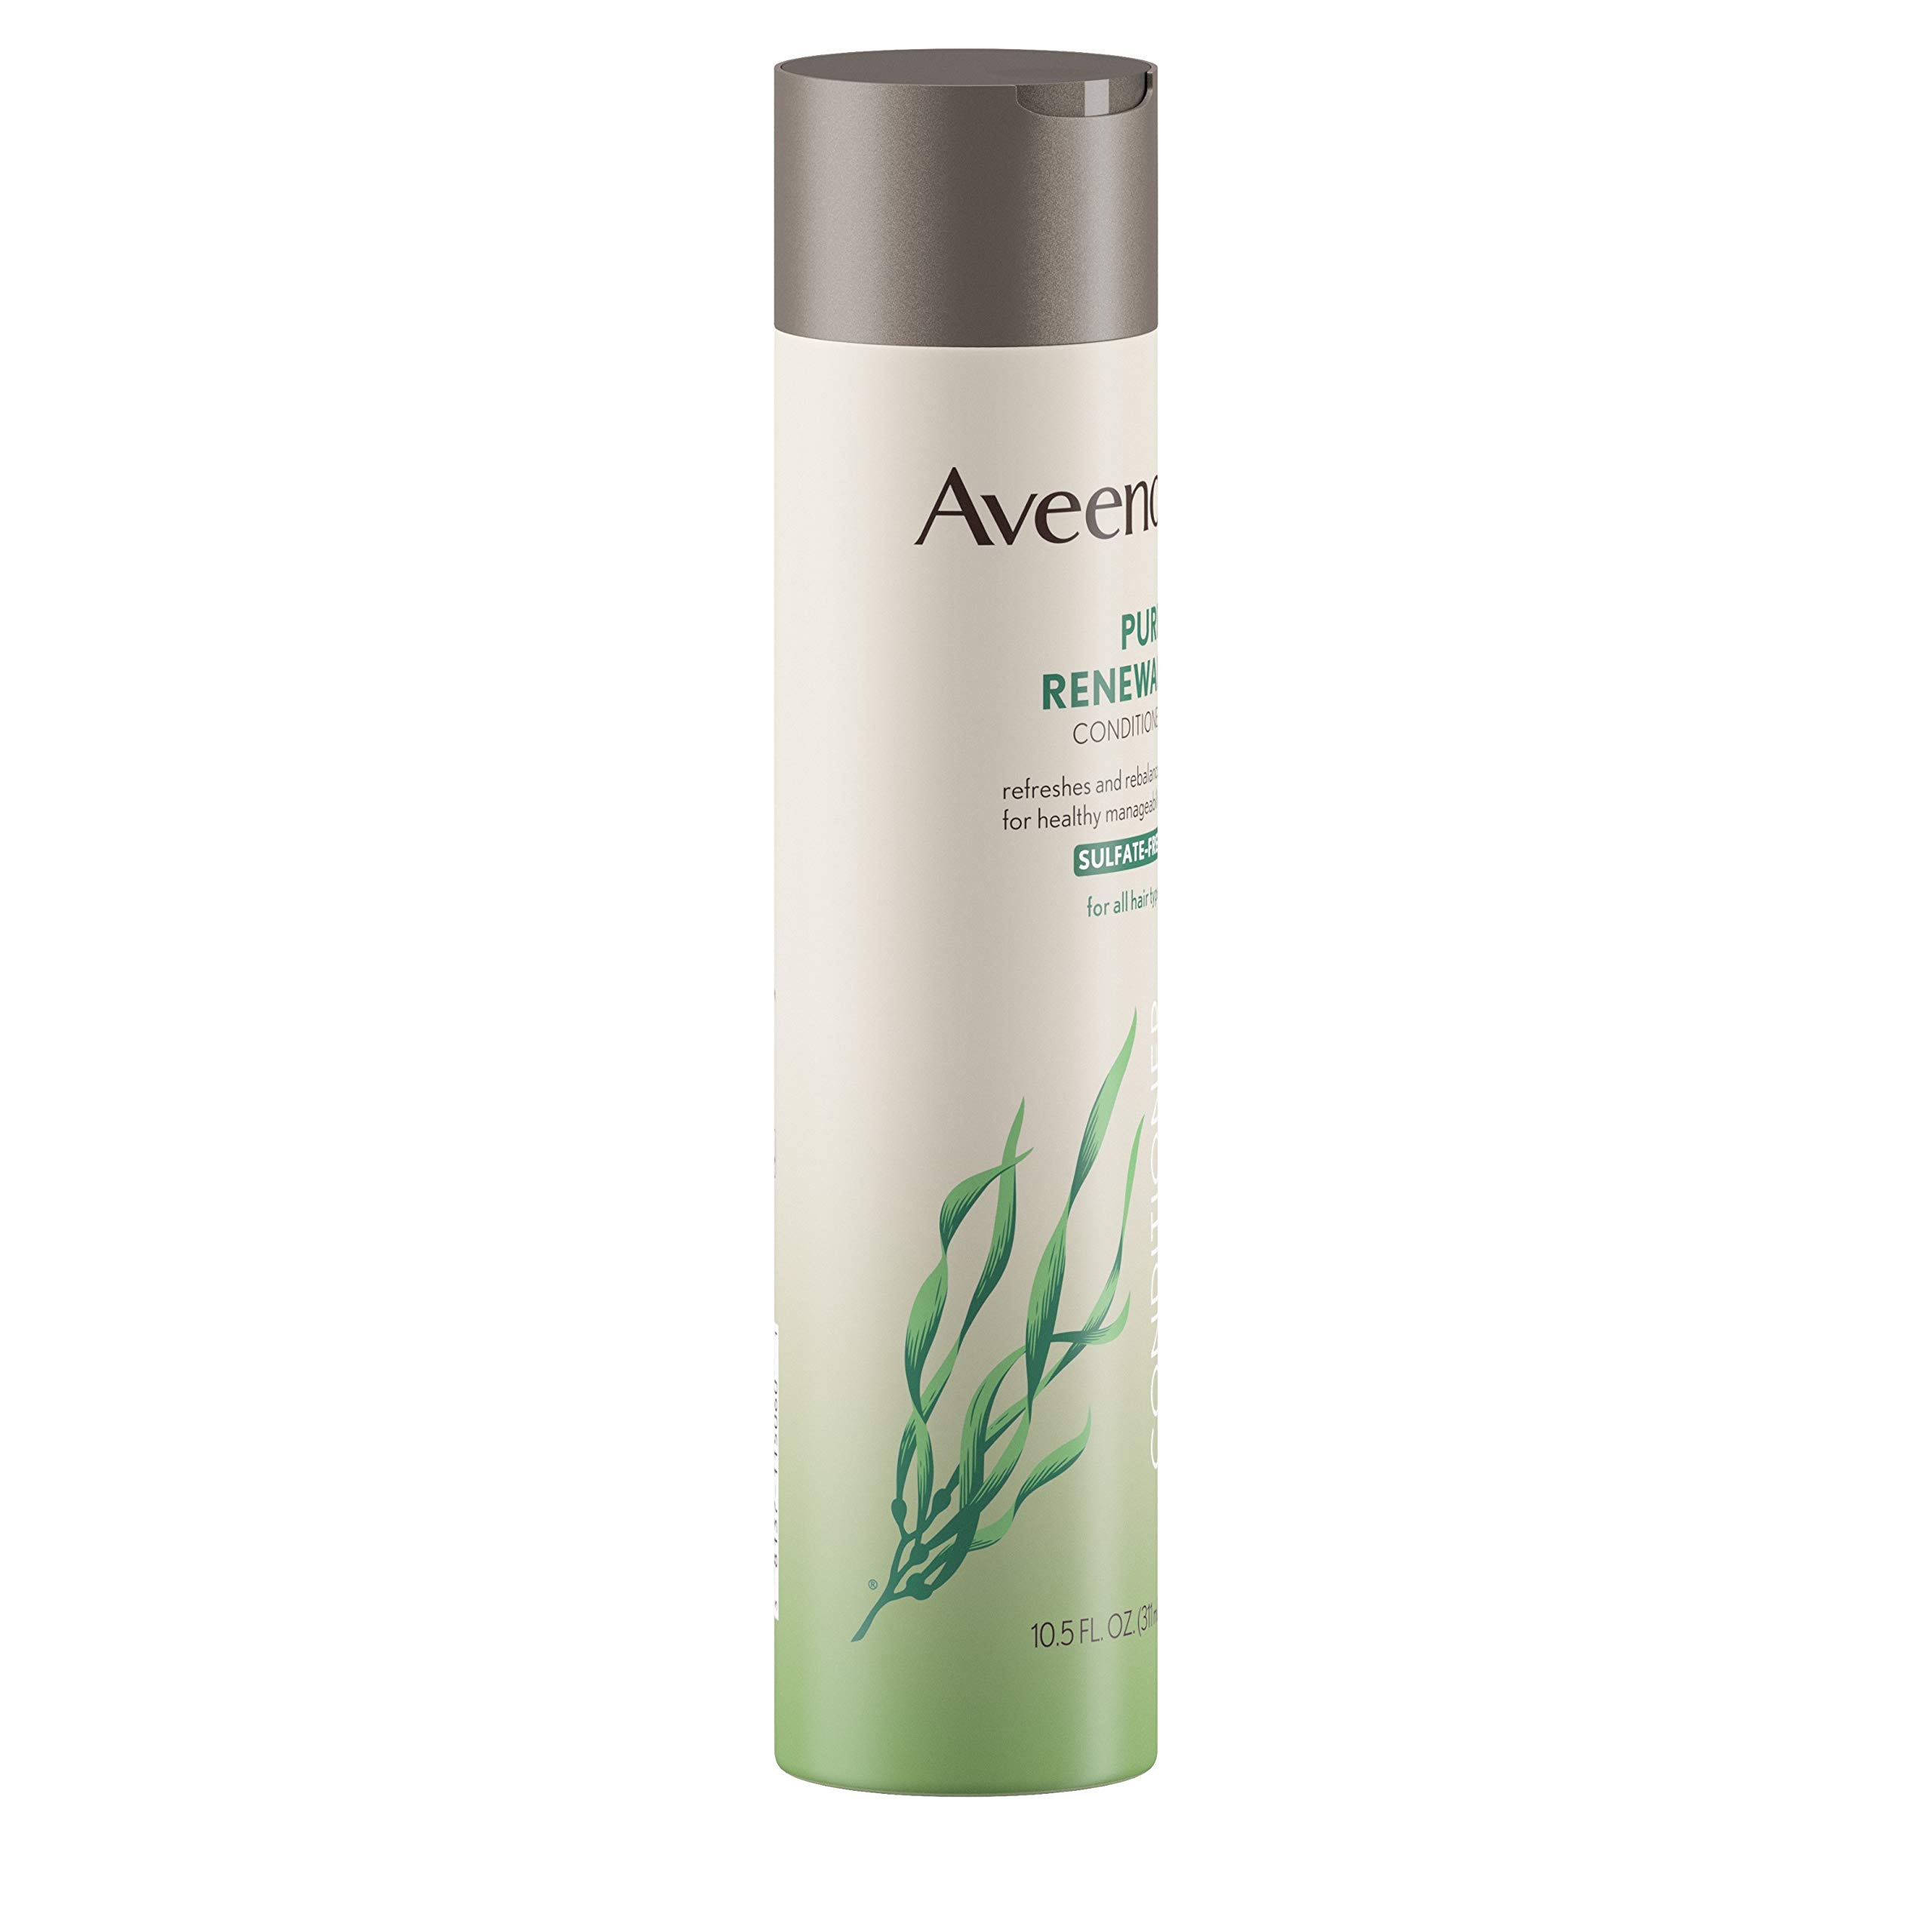 OGX Aveeno Pure Renewal Hair Conditioner Moisturizing Conditioner with Seaweed Extract SulfateFree Formula, 21 Fl Oz, (Pack of 2)